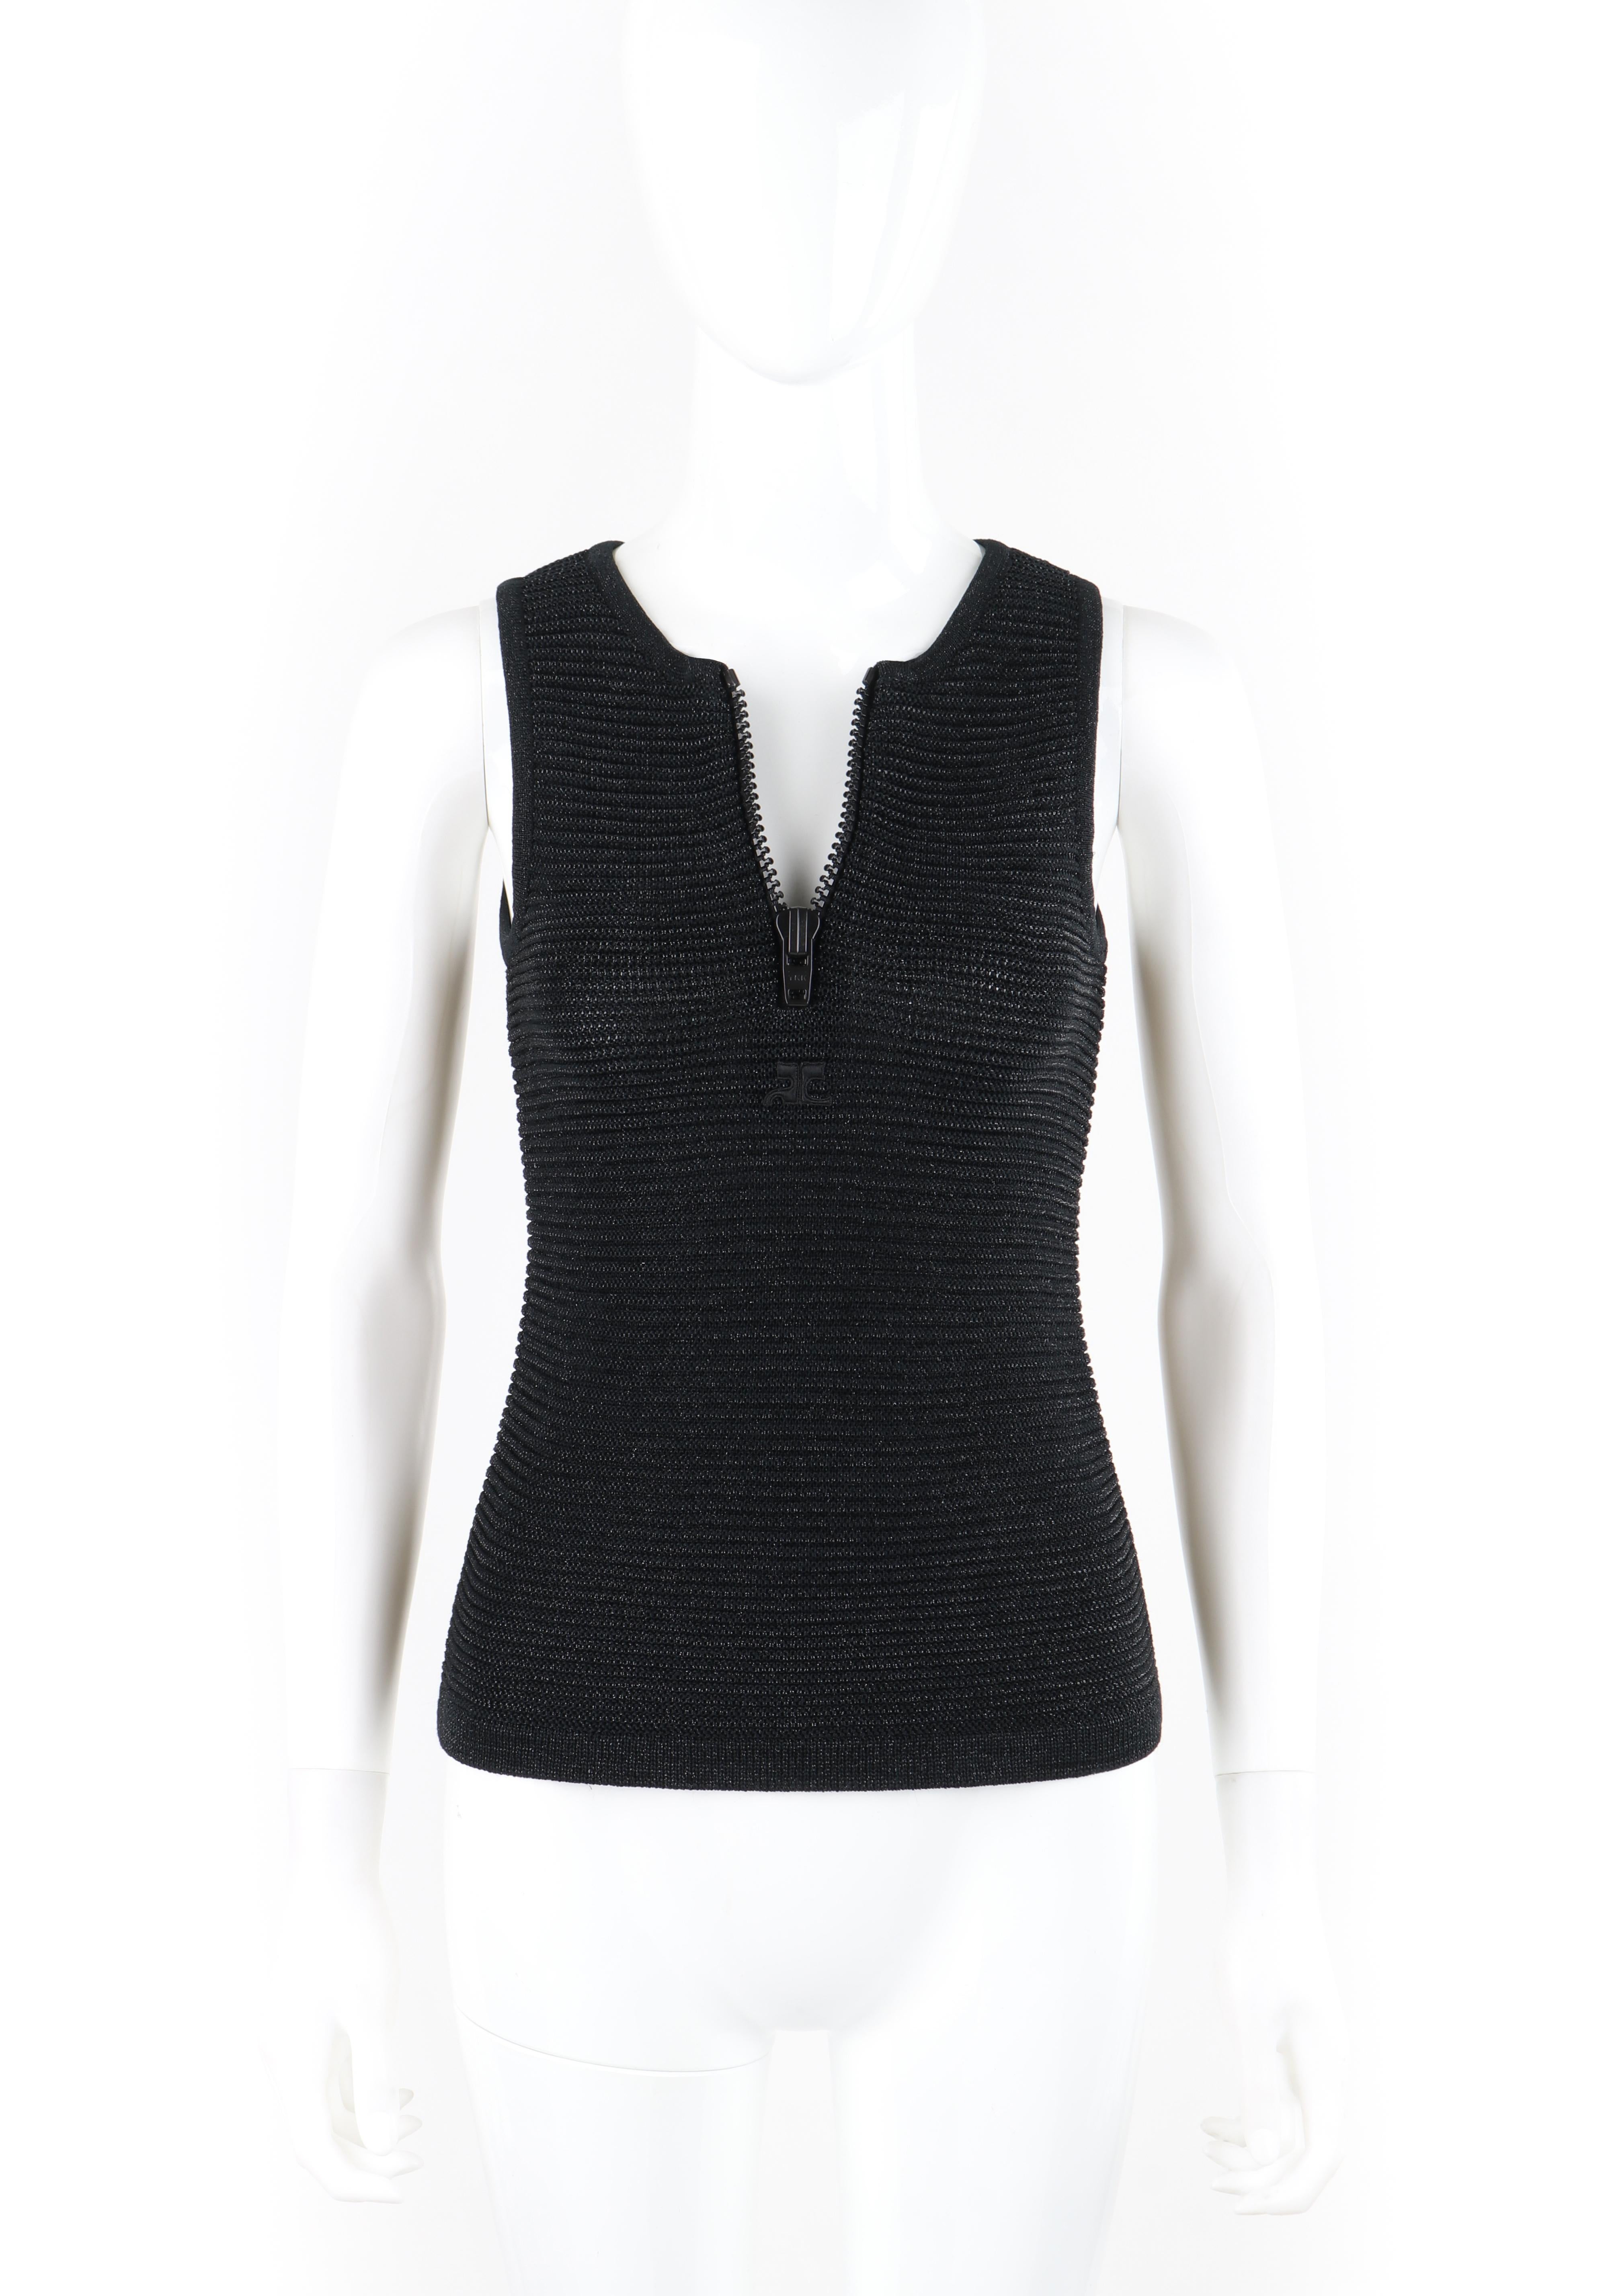 Brand / Manufacturer: Courreges 
Circa: 1960s
Designer: Andre Courreges
Style: Sweater top
Color(s): Shades of black, silver
Lined: No
Marked Fabric Content: 